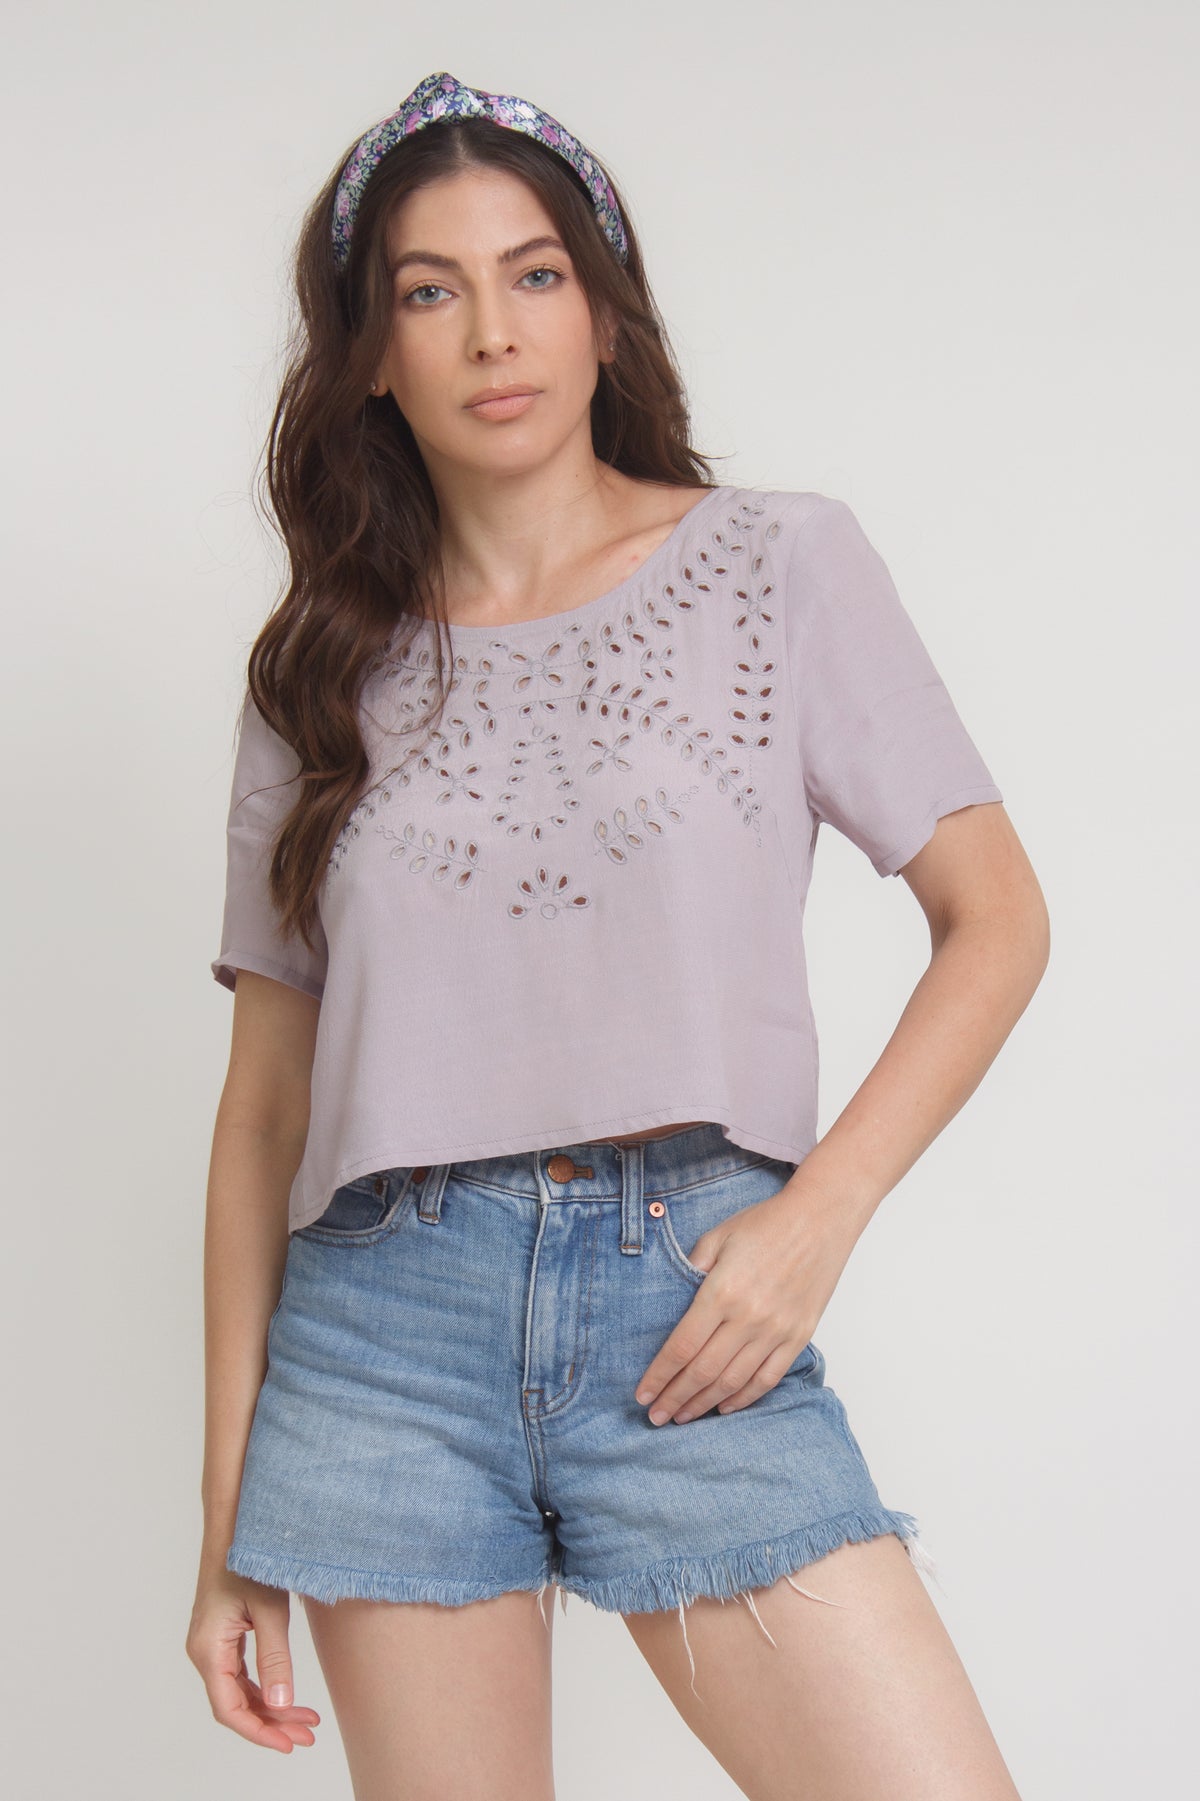 Eyelet cropped blouse, in Lilac.